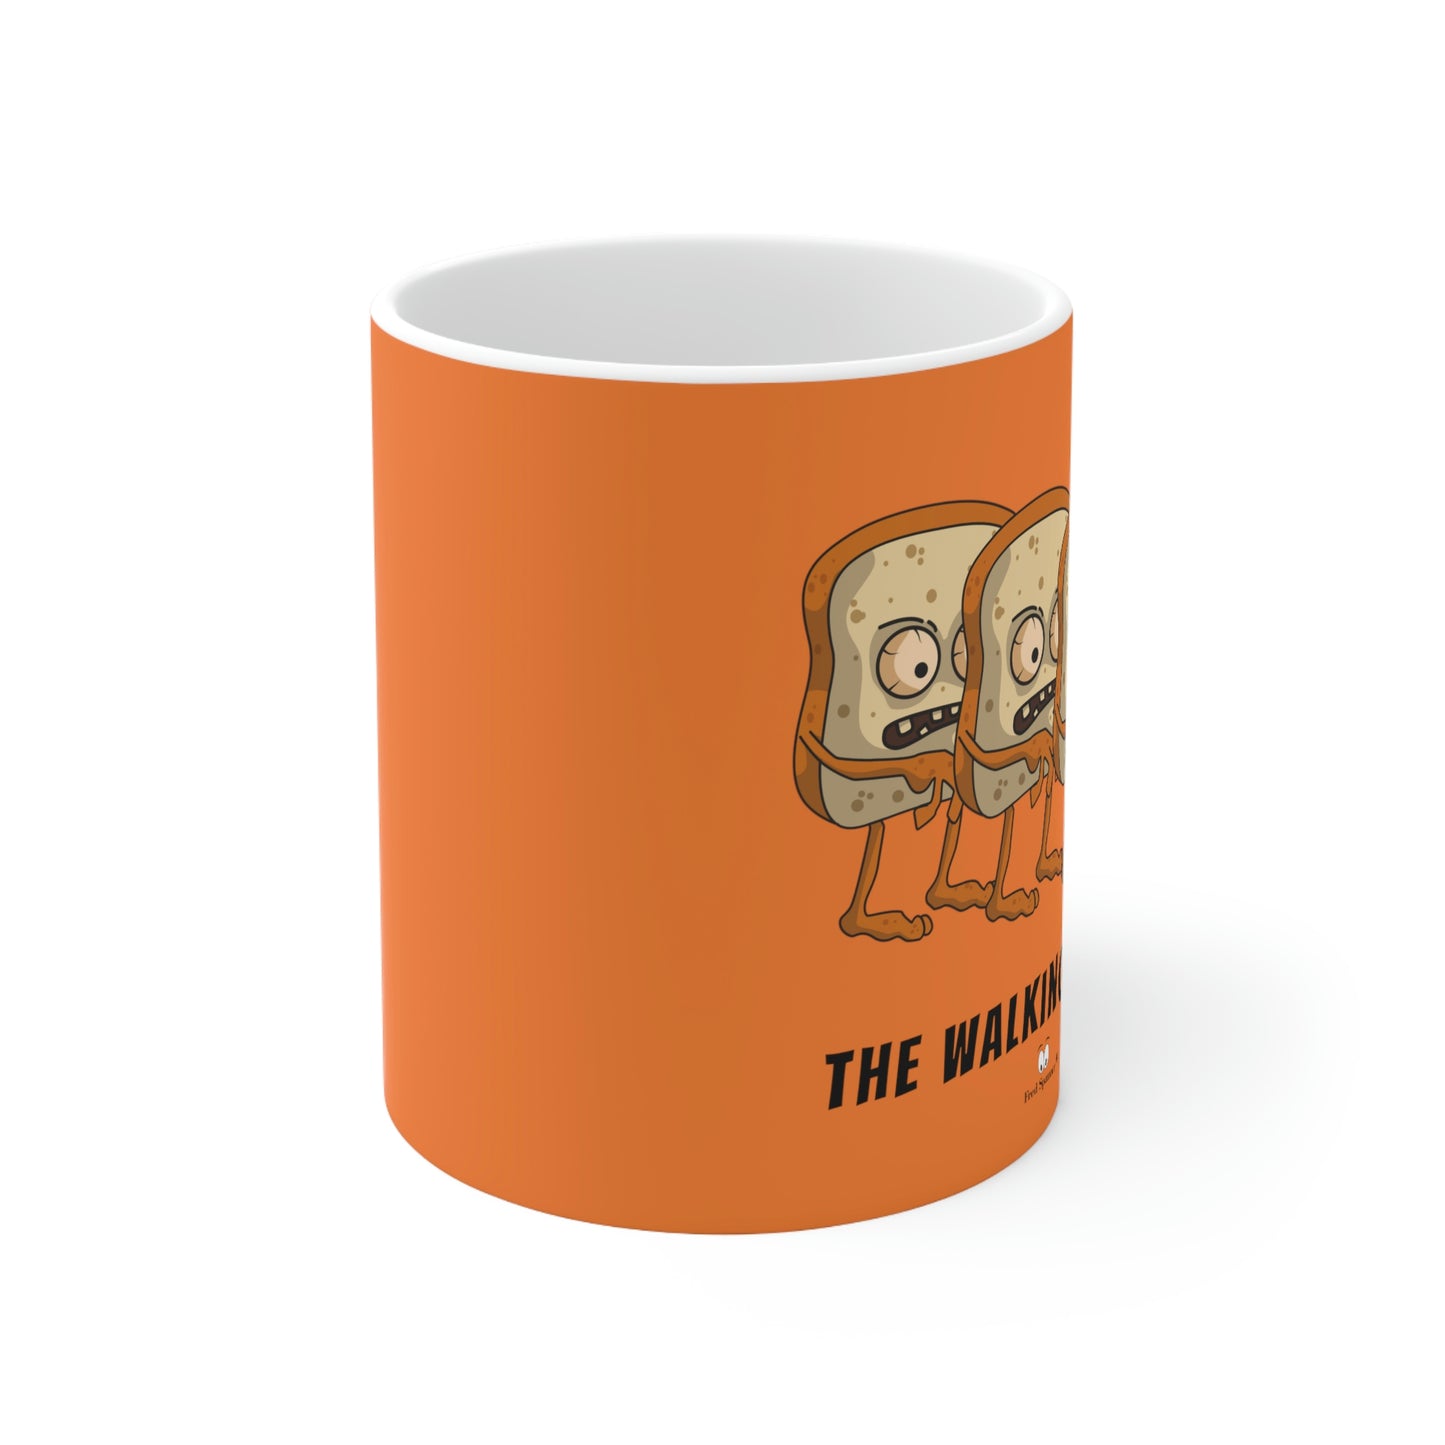 The Walking Bread- Ceramic Coffee Cup